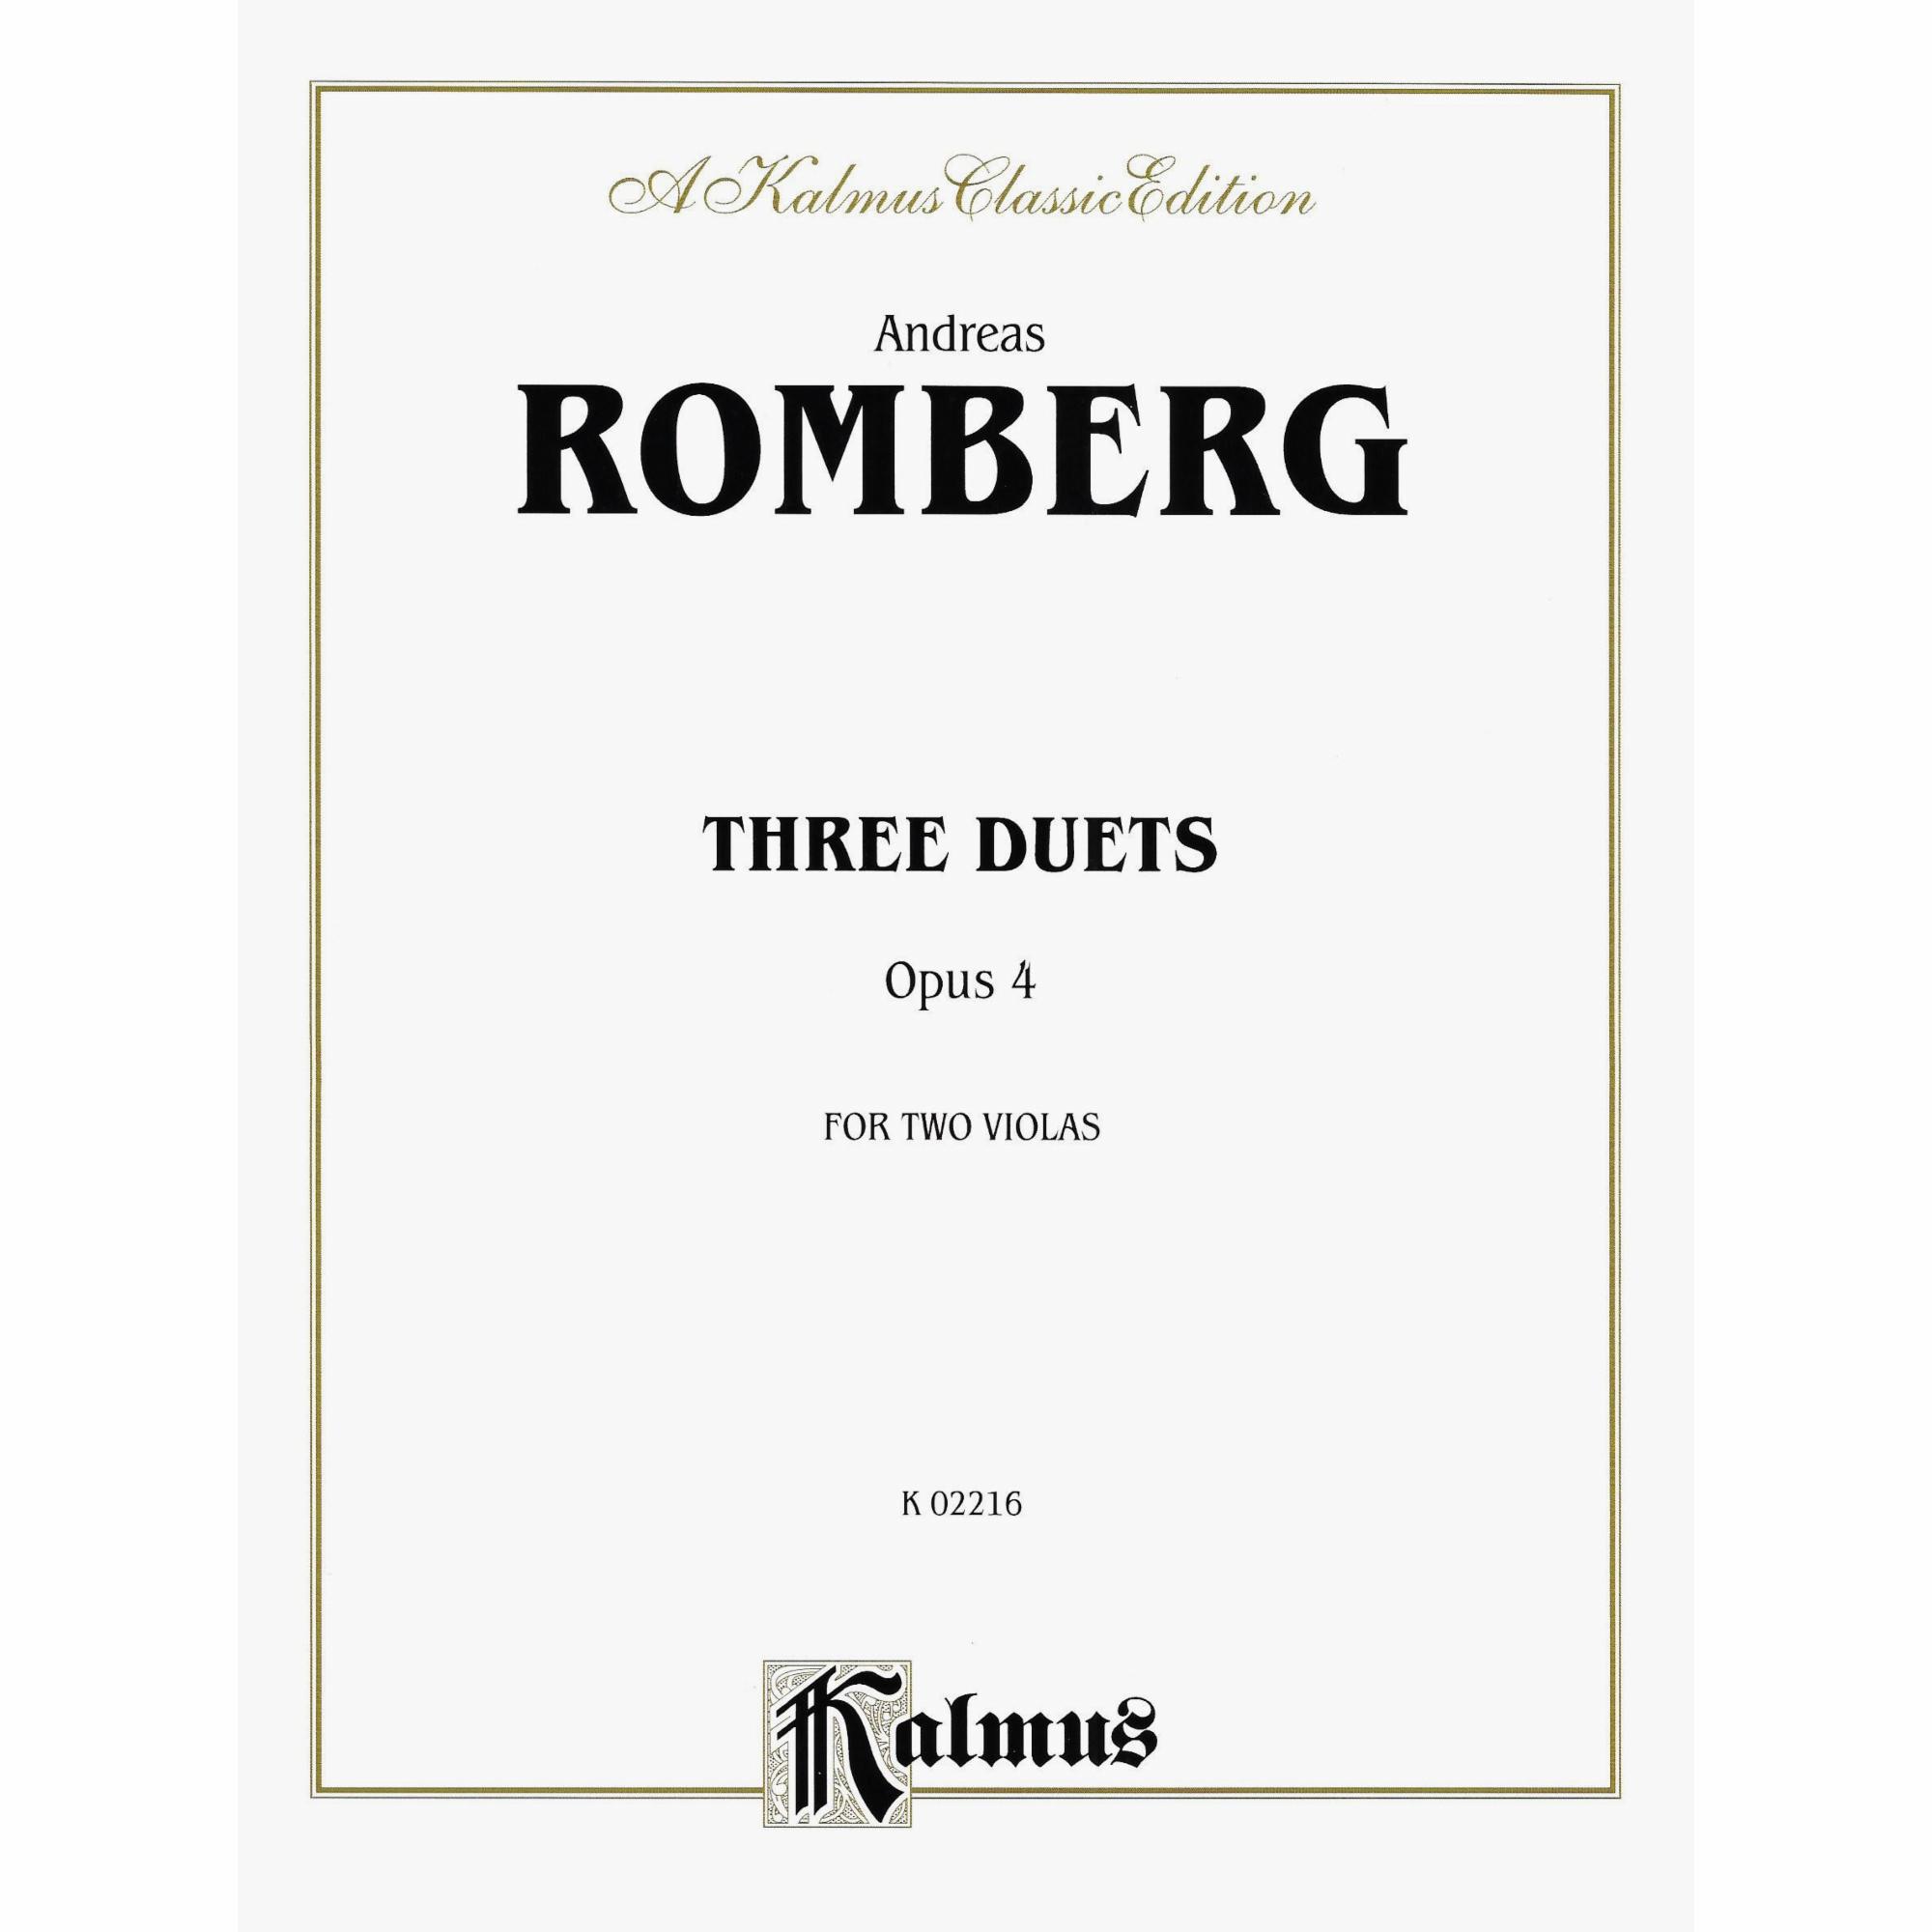 Romberg -- Three Duets, Op. 4 for Two Violas